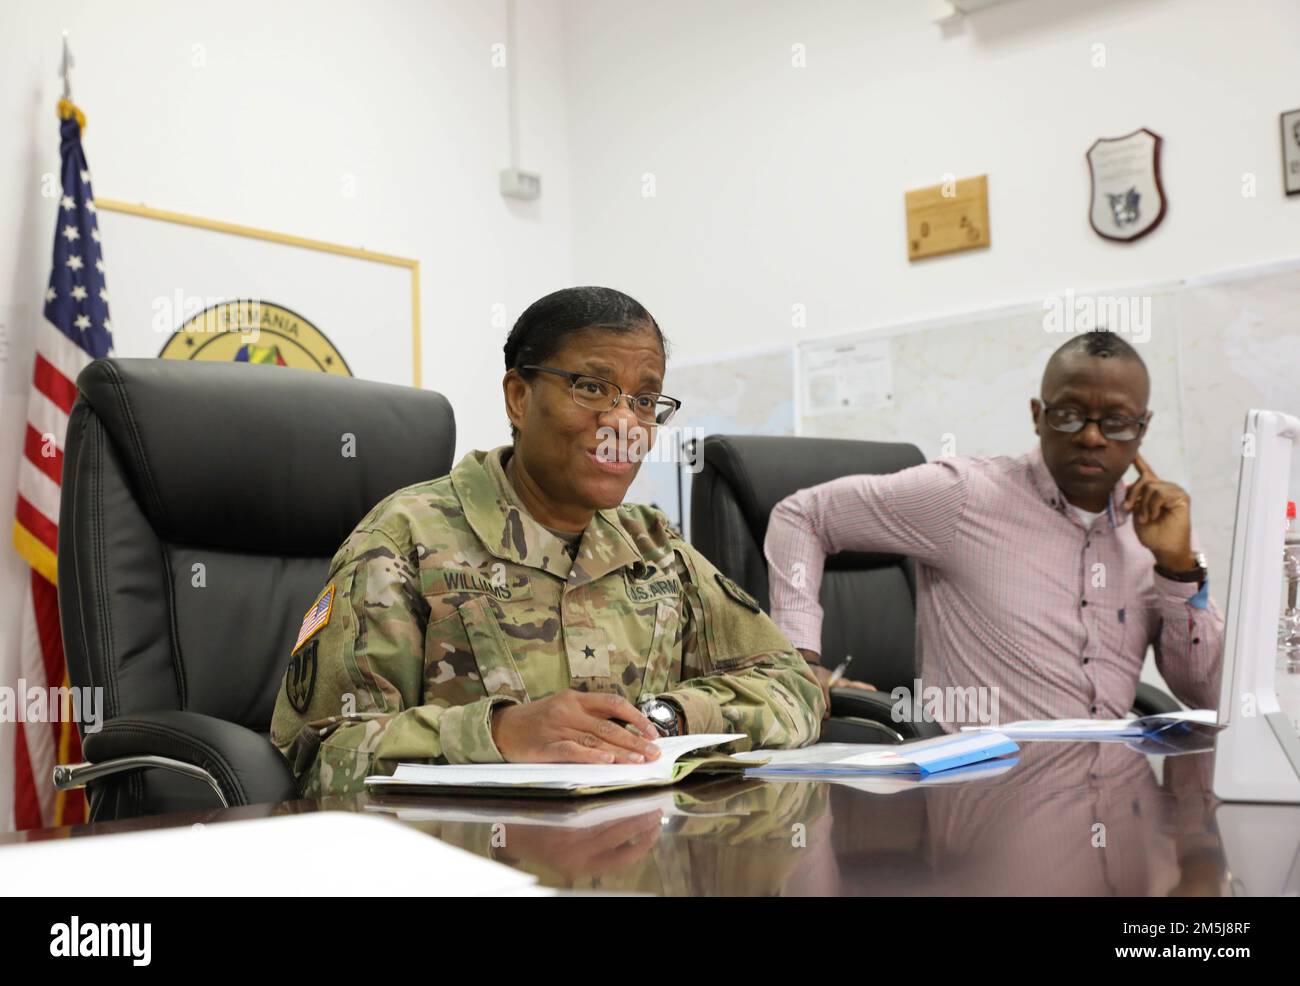 U.S. Army Reserve Brig. Gen. Wanda N. Williams, Deputy Commanding General of 21 st Theater Sustainment Command, speaks at a command brief with Area Support Team Black Sea (ASG and ASA) at Mihail Kogalniceanu Air Base, Romania, on March 18, 2022. The Area Support Team Black Sea supports all U.S. training in Romania, Bulgaria, and Greece in order to enhance U.S. relations with our NATO Allies and Partners. Stock Photo